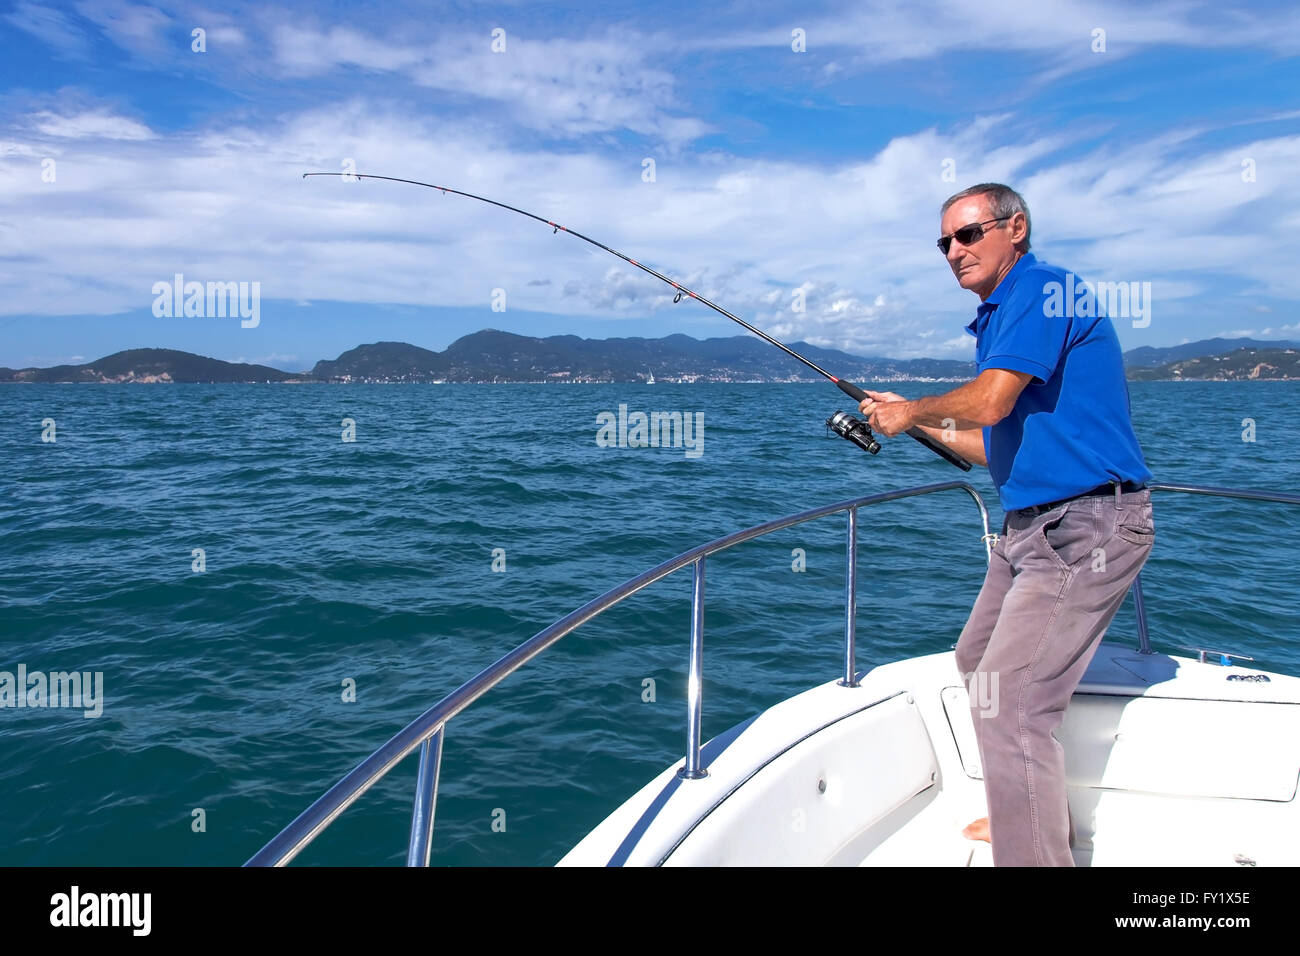 Angler fisherman fighting big fish on the ocean from the boat Stock Photo